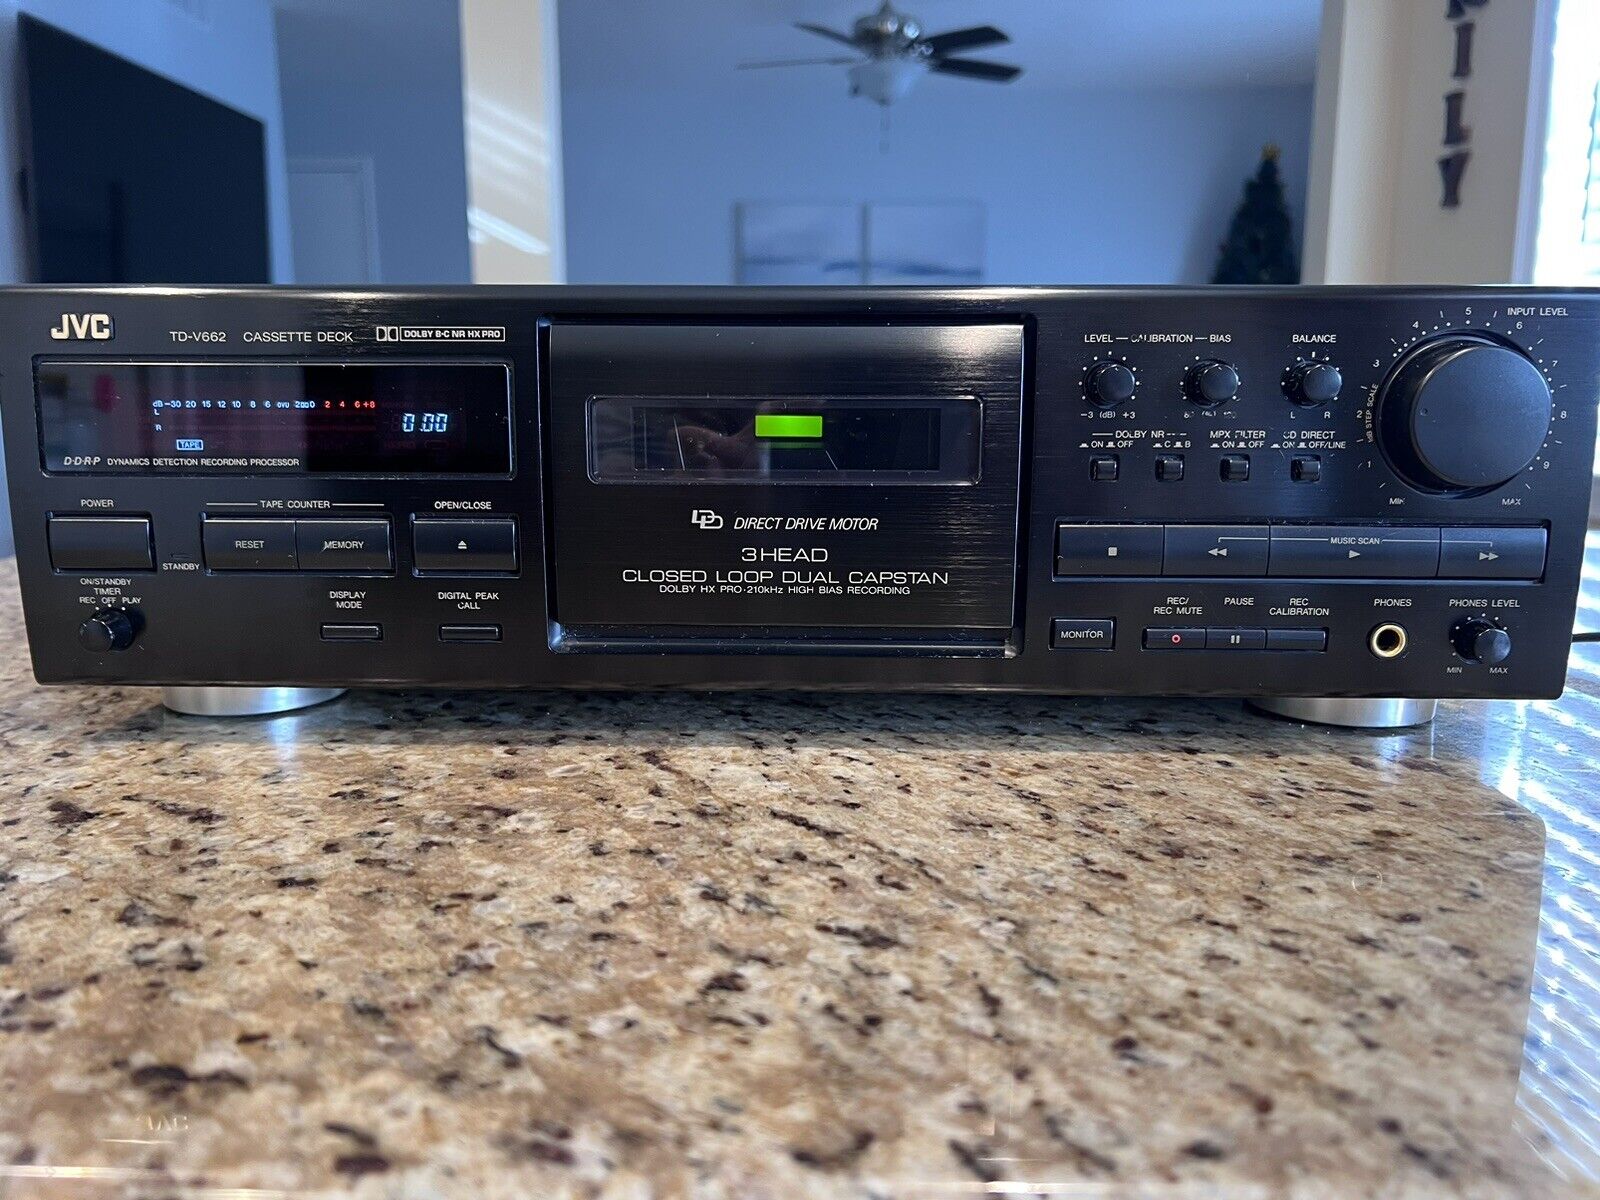 Jvc Td-v662 3-head / Dual Capstan / Beautiful Condition..rare.works Flawlessly!